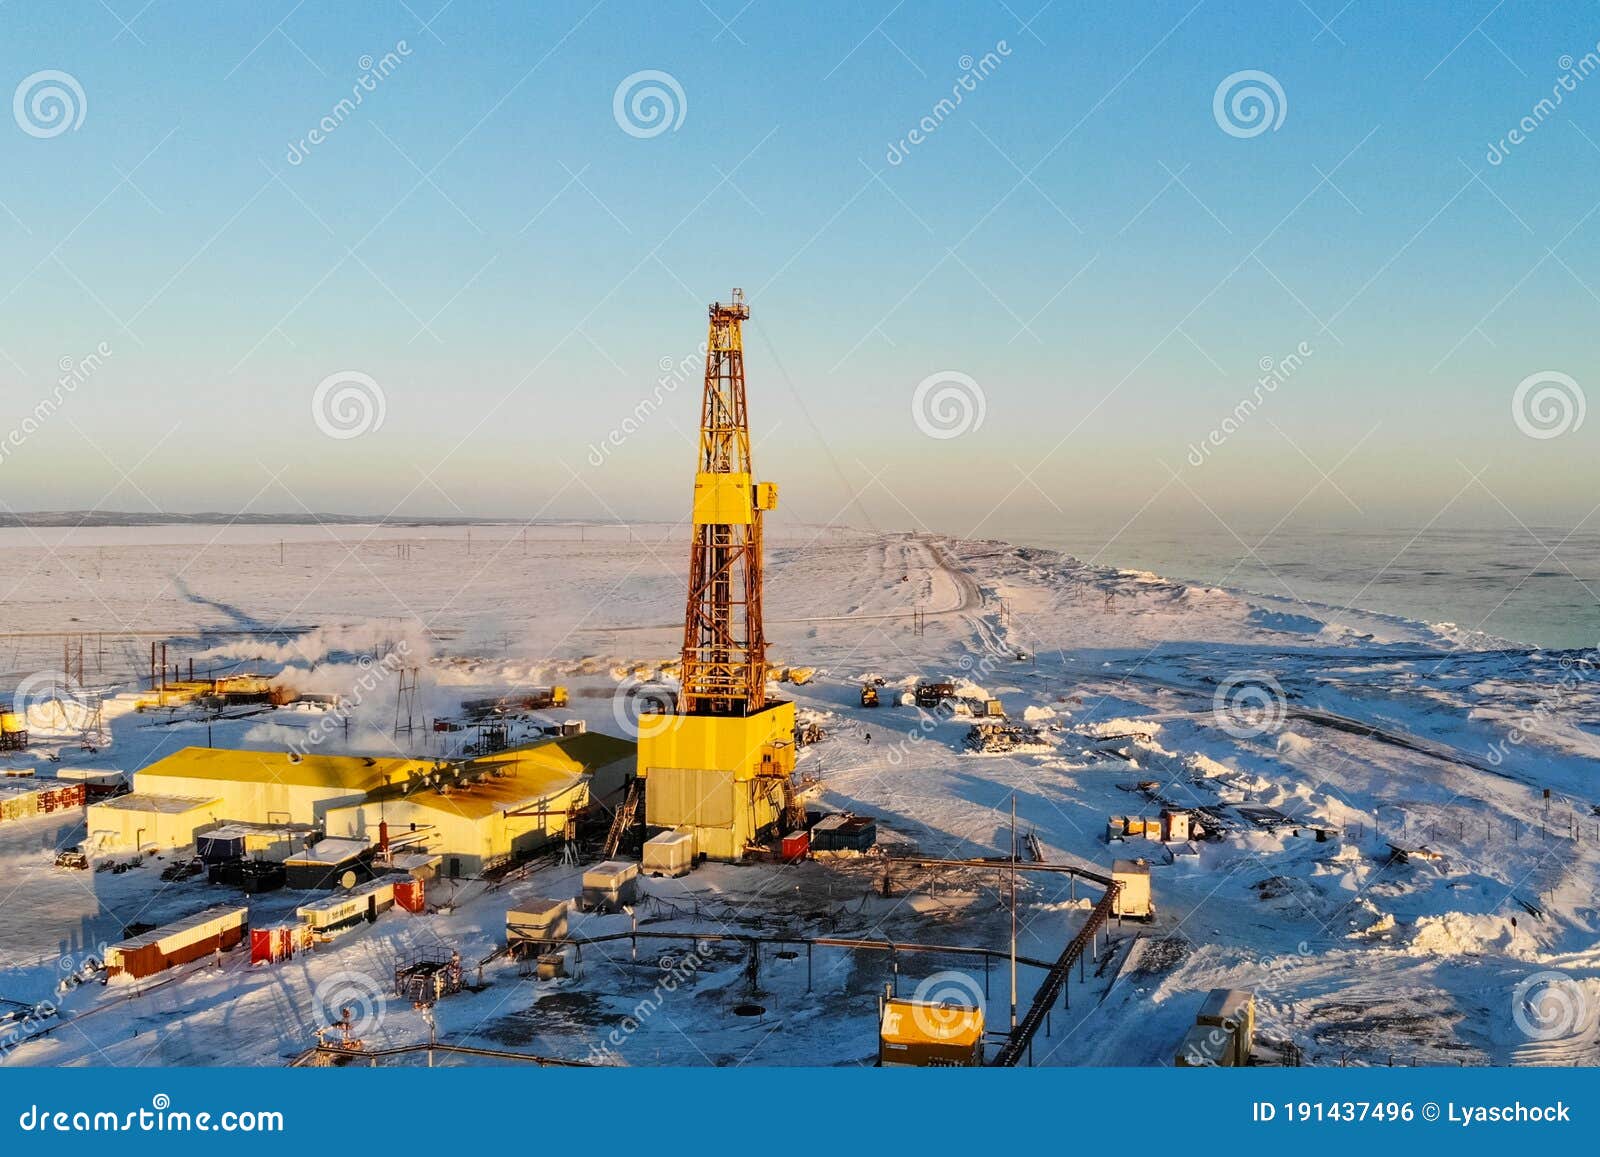 Drilling Rig for Oil and Gas Well Drilling Stock Photo Image of